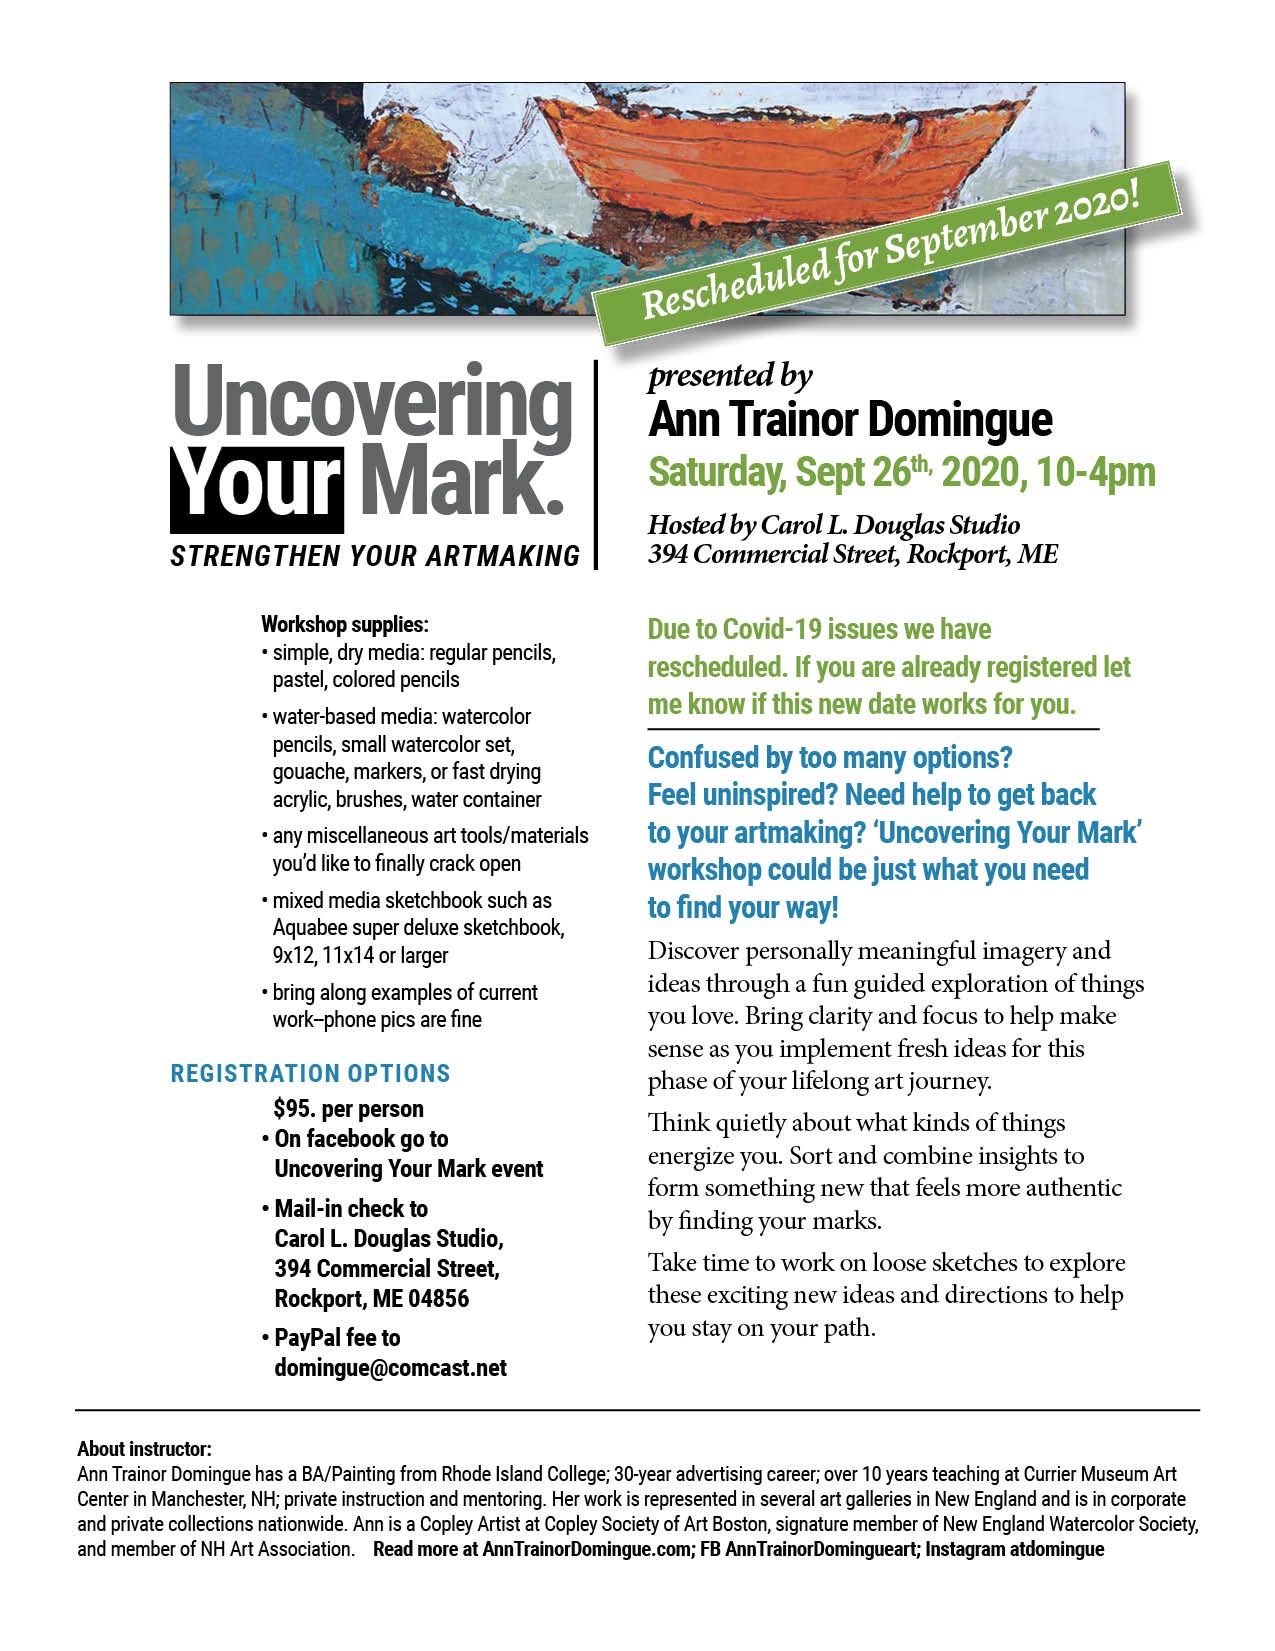 Click here to view Uncovering Workshop Reschedule by Ann Trainor Domingue